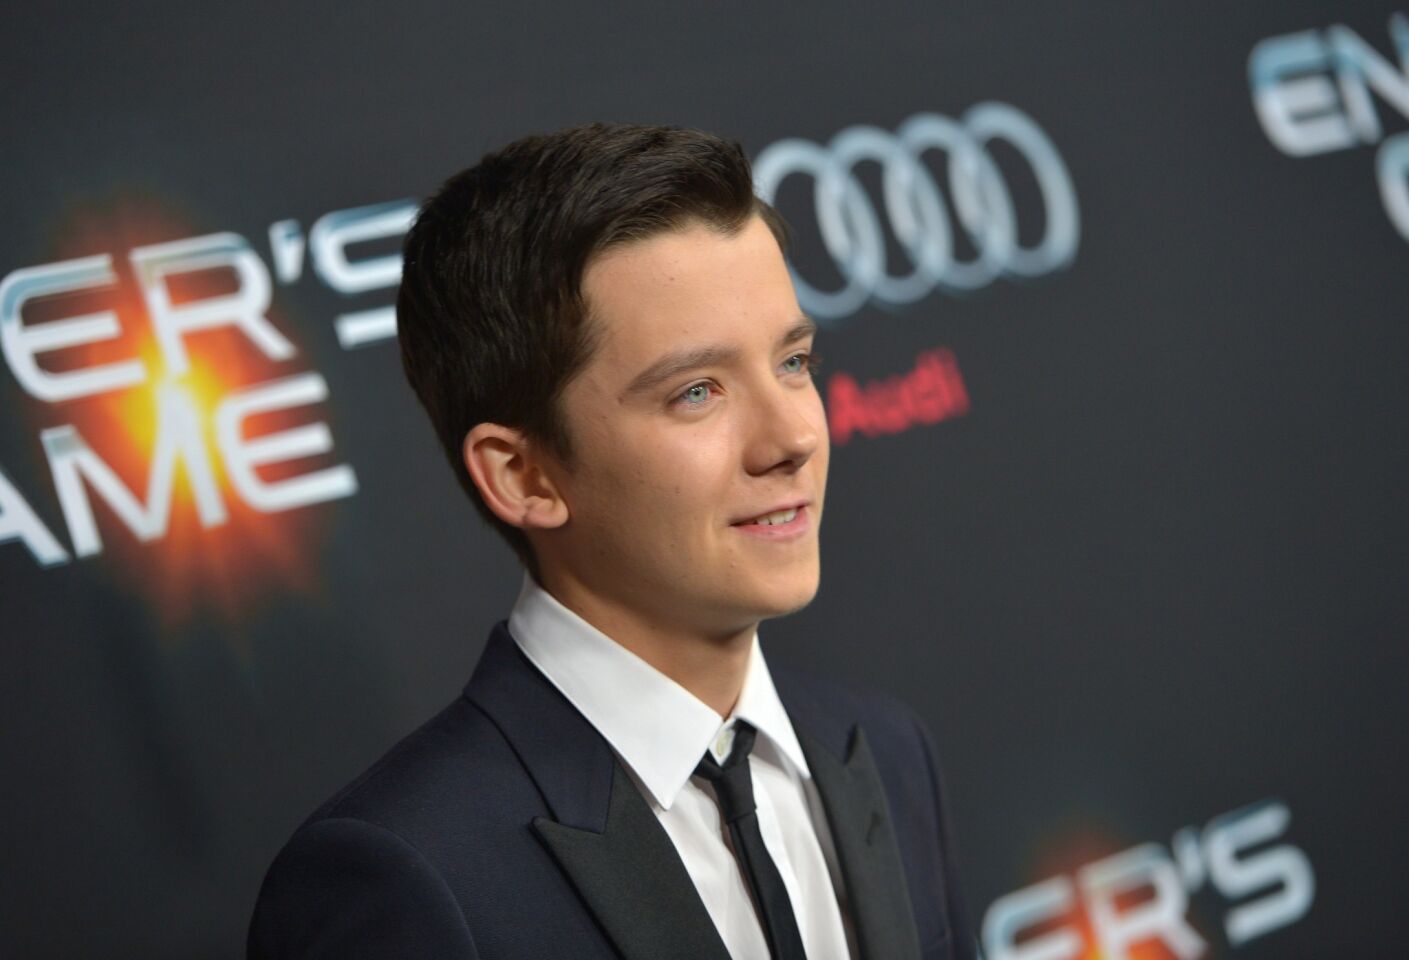 Asa Butterfield arrives at the Los Angeles premiere of "Ender's Game."